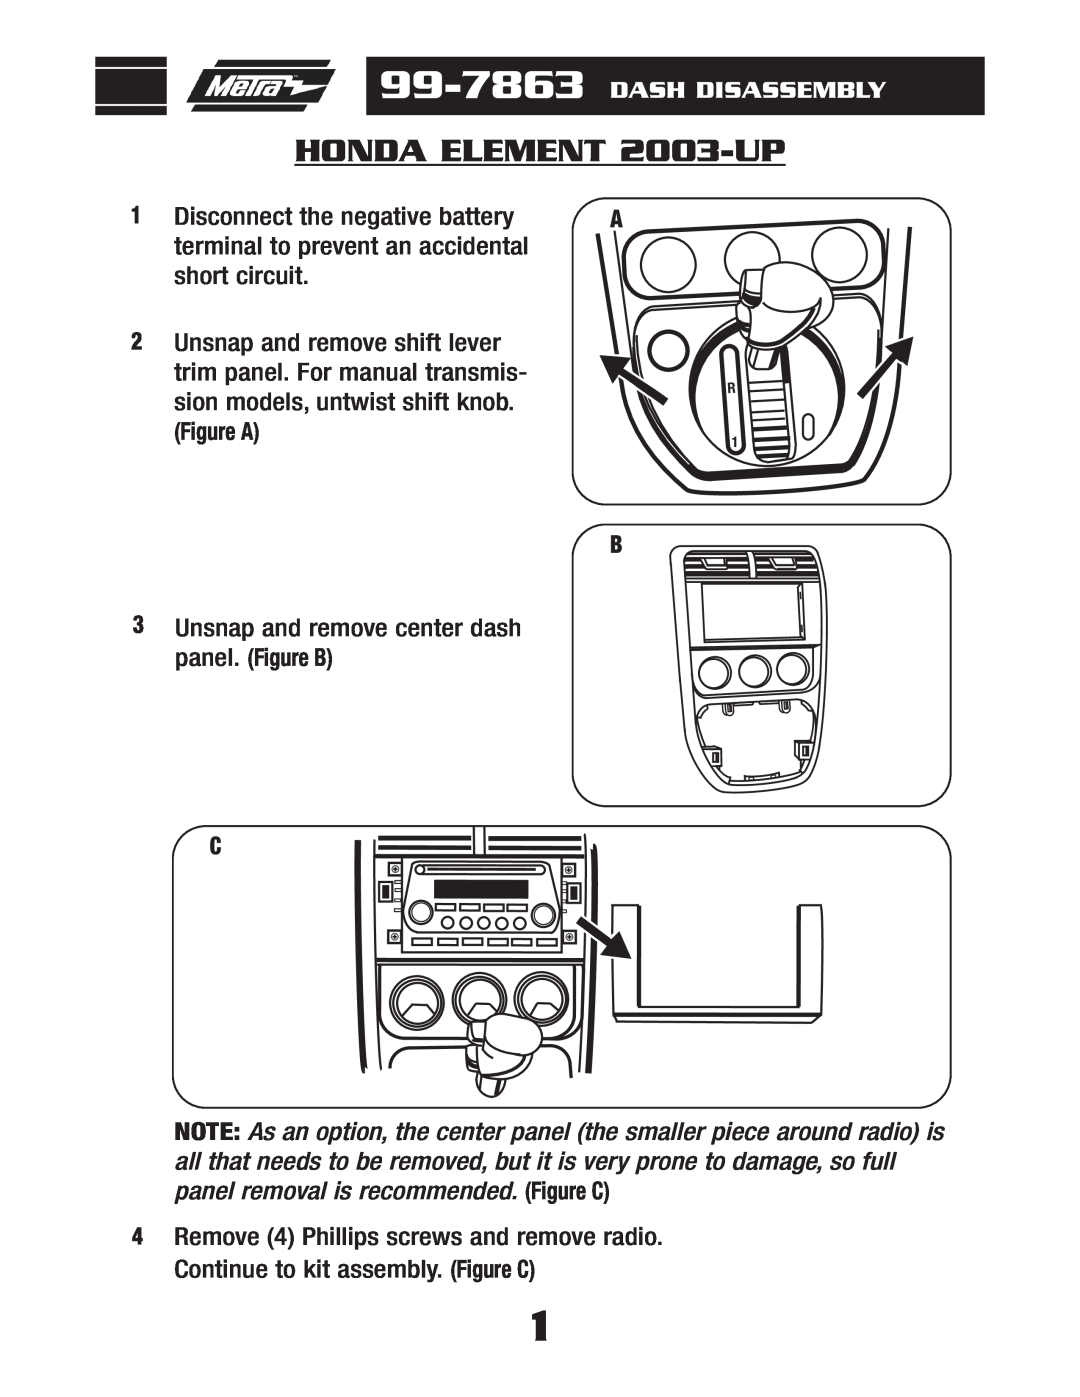 Metra Electronics 99-7863 installation instructions HONDA ELEMENT 2003-UP, Dash Disassembly, Figure A 